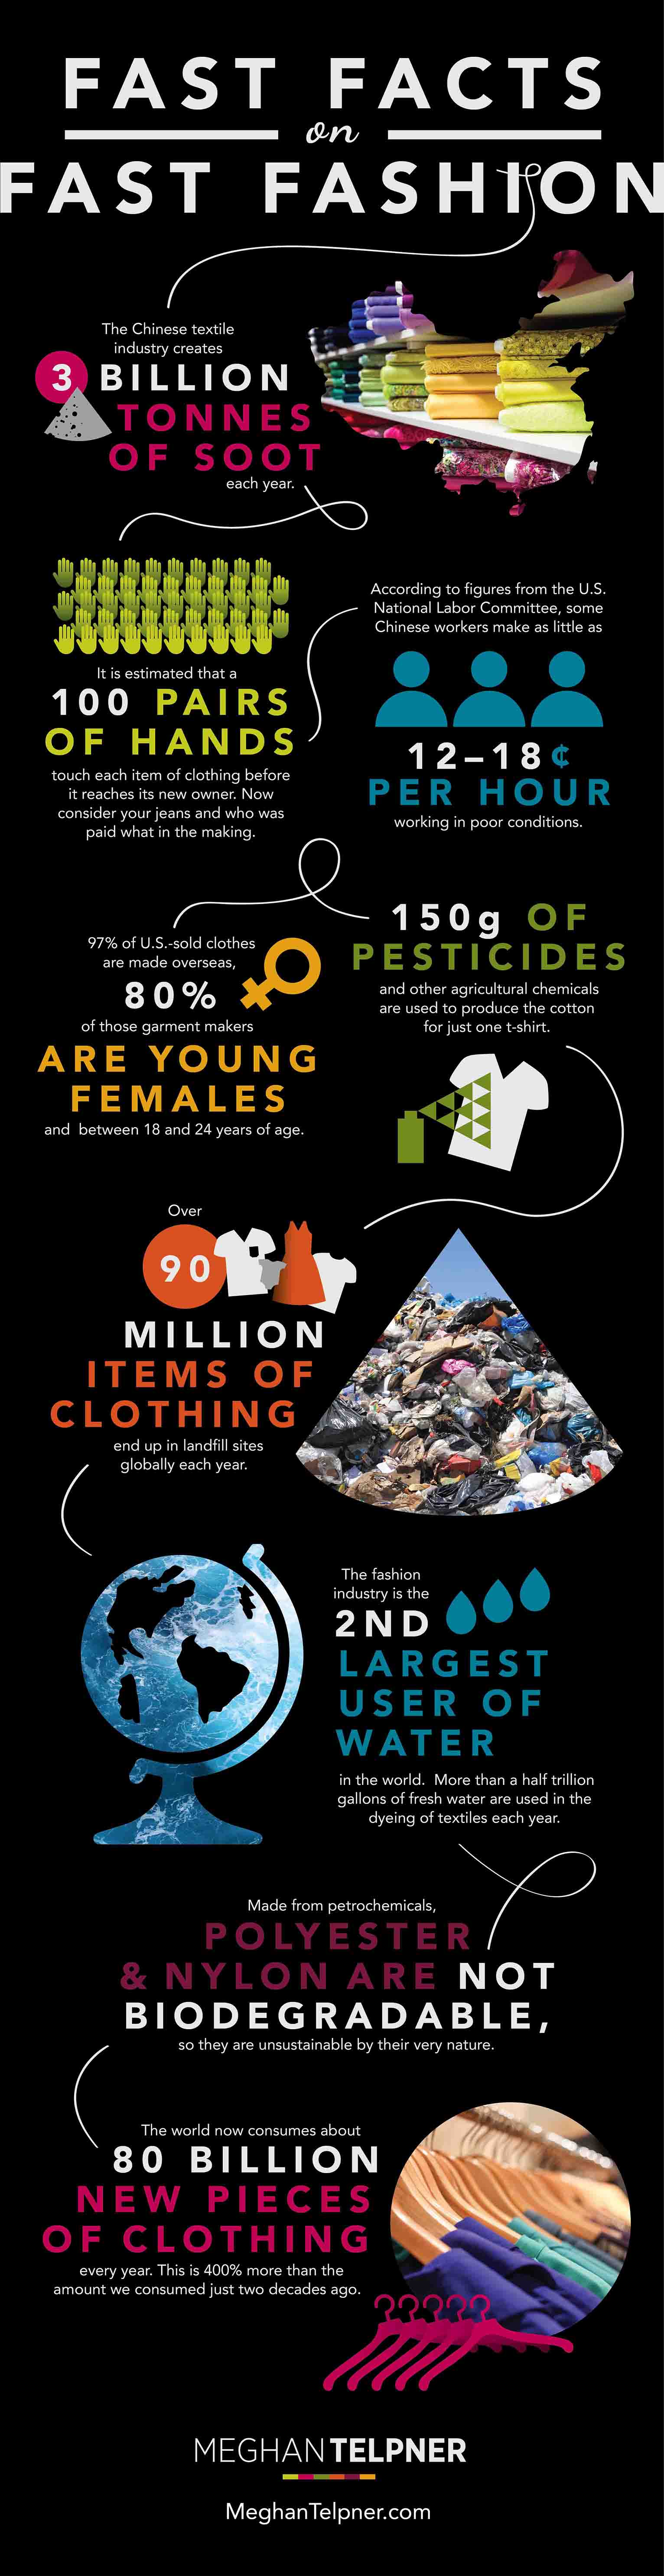 Fast Fashion Facts